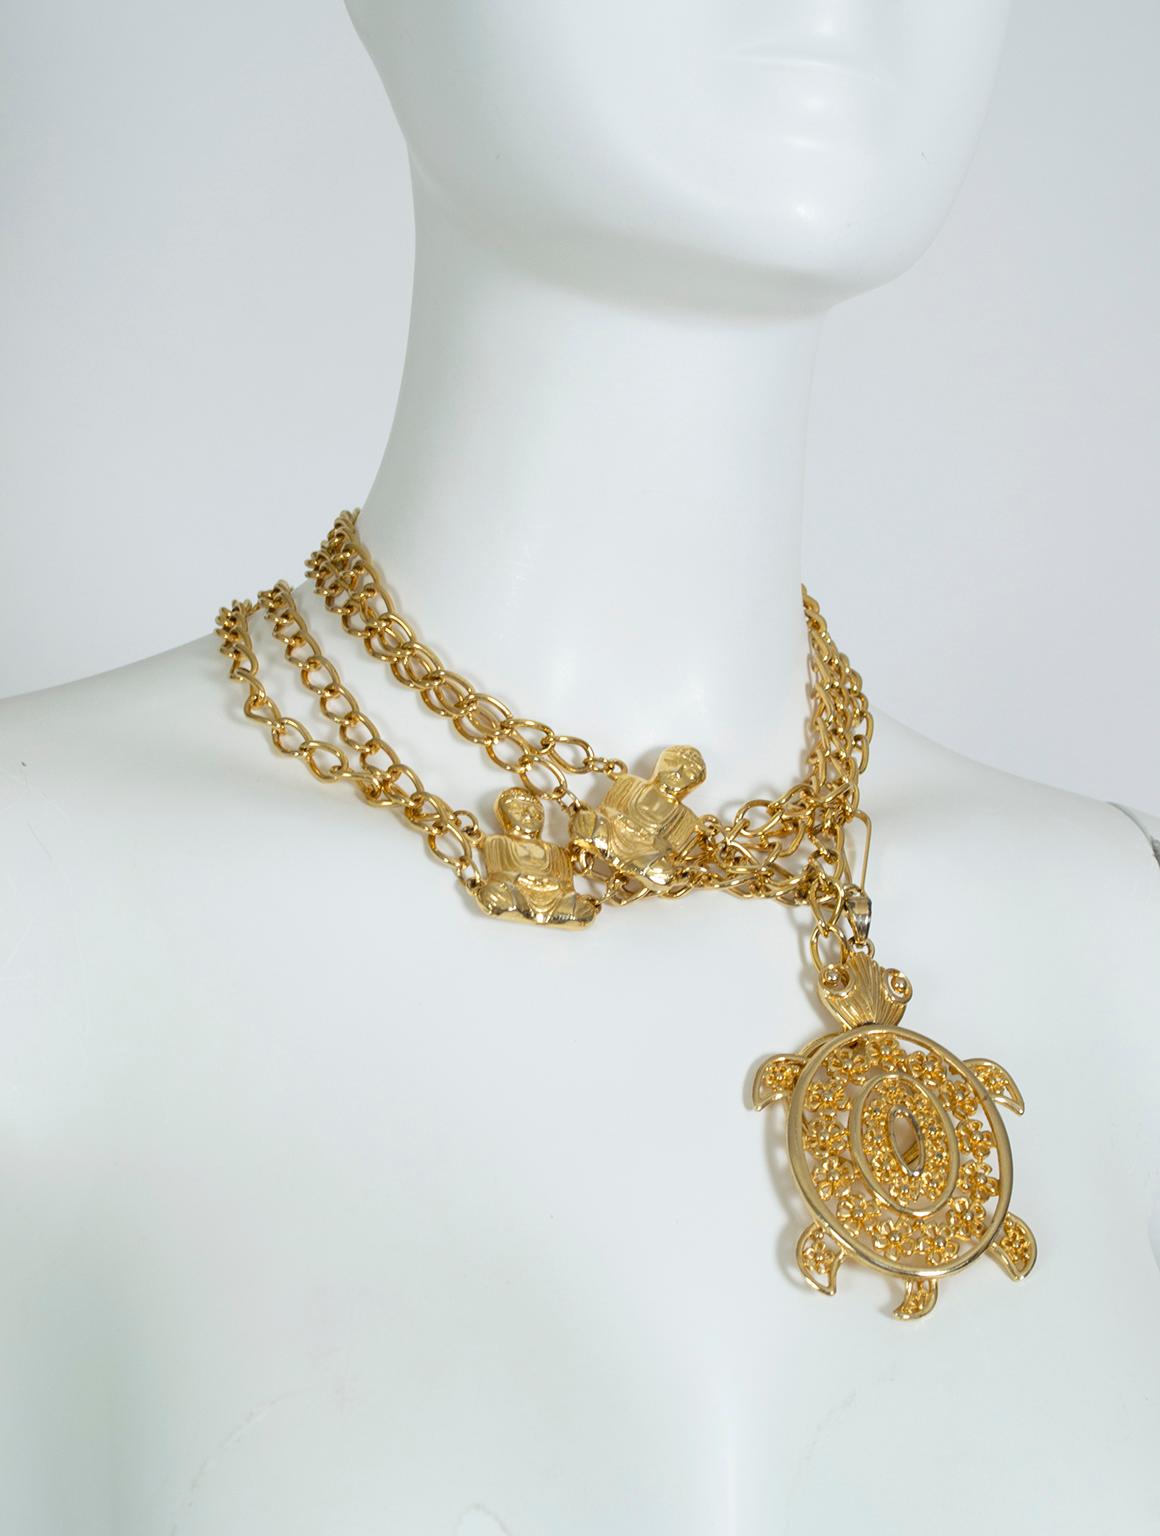 Women's or Men's “Golden Turtle” Buddhist Chain Belt with Dangling Turtle Talisman – O/S, 1980s